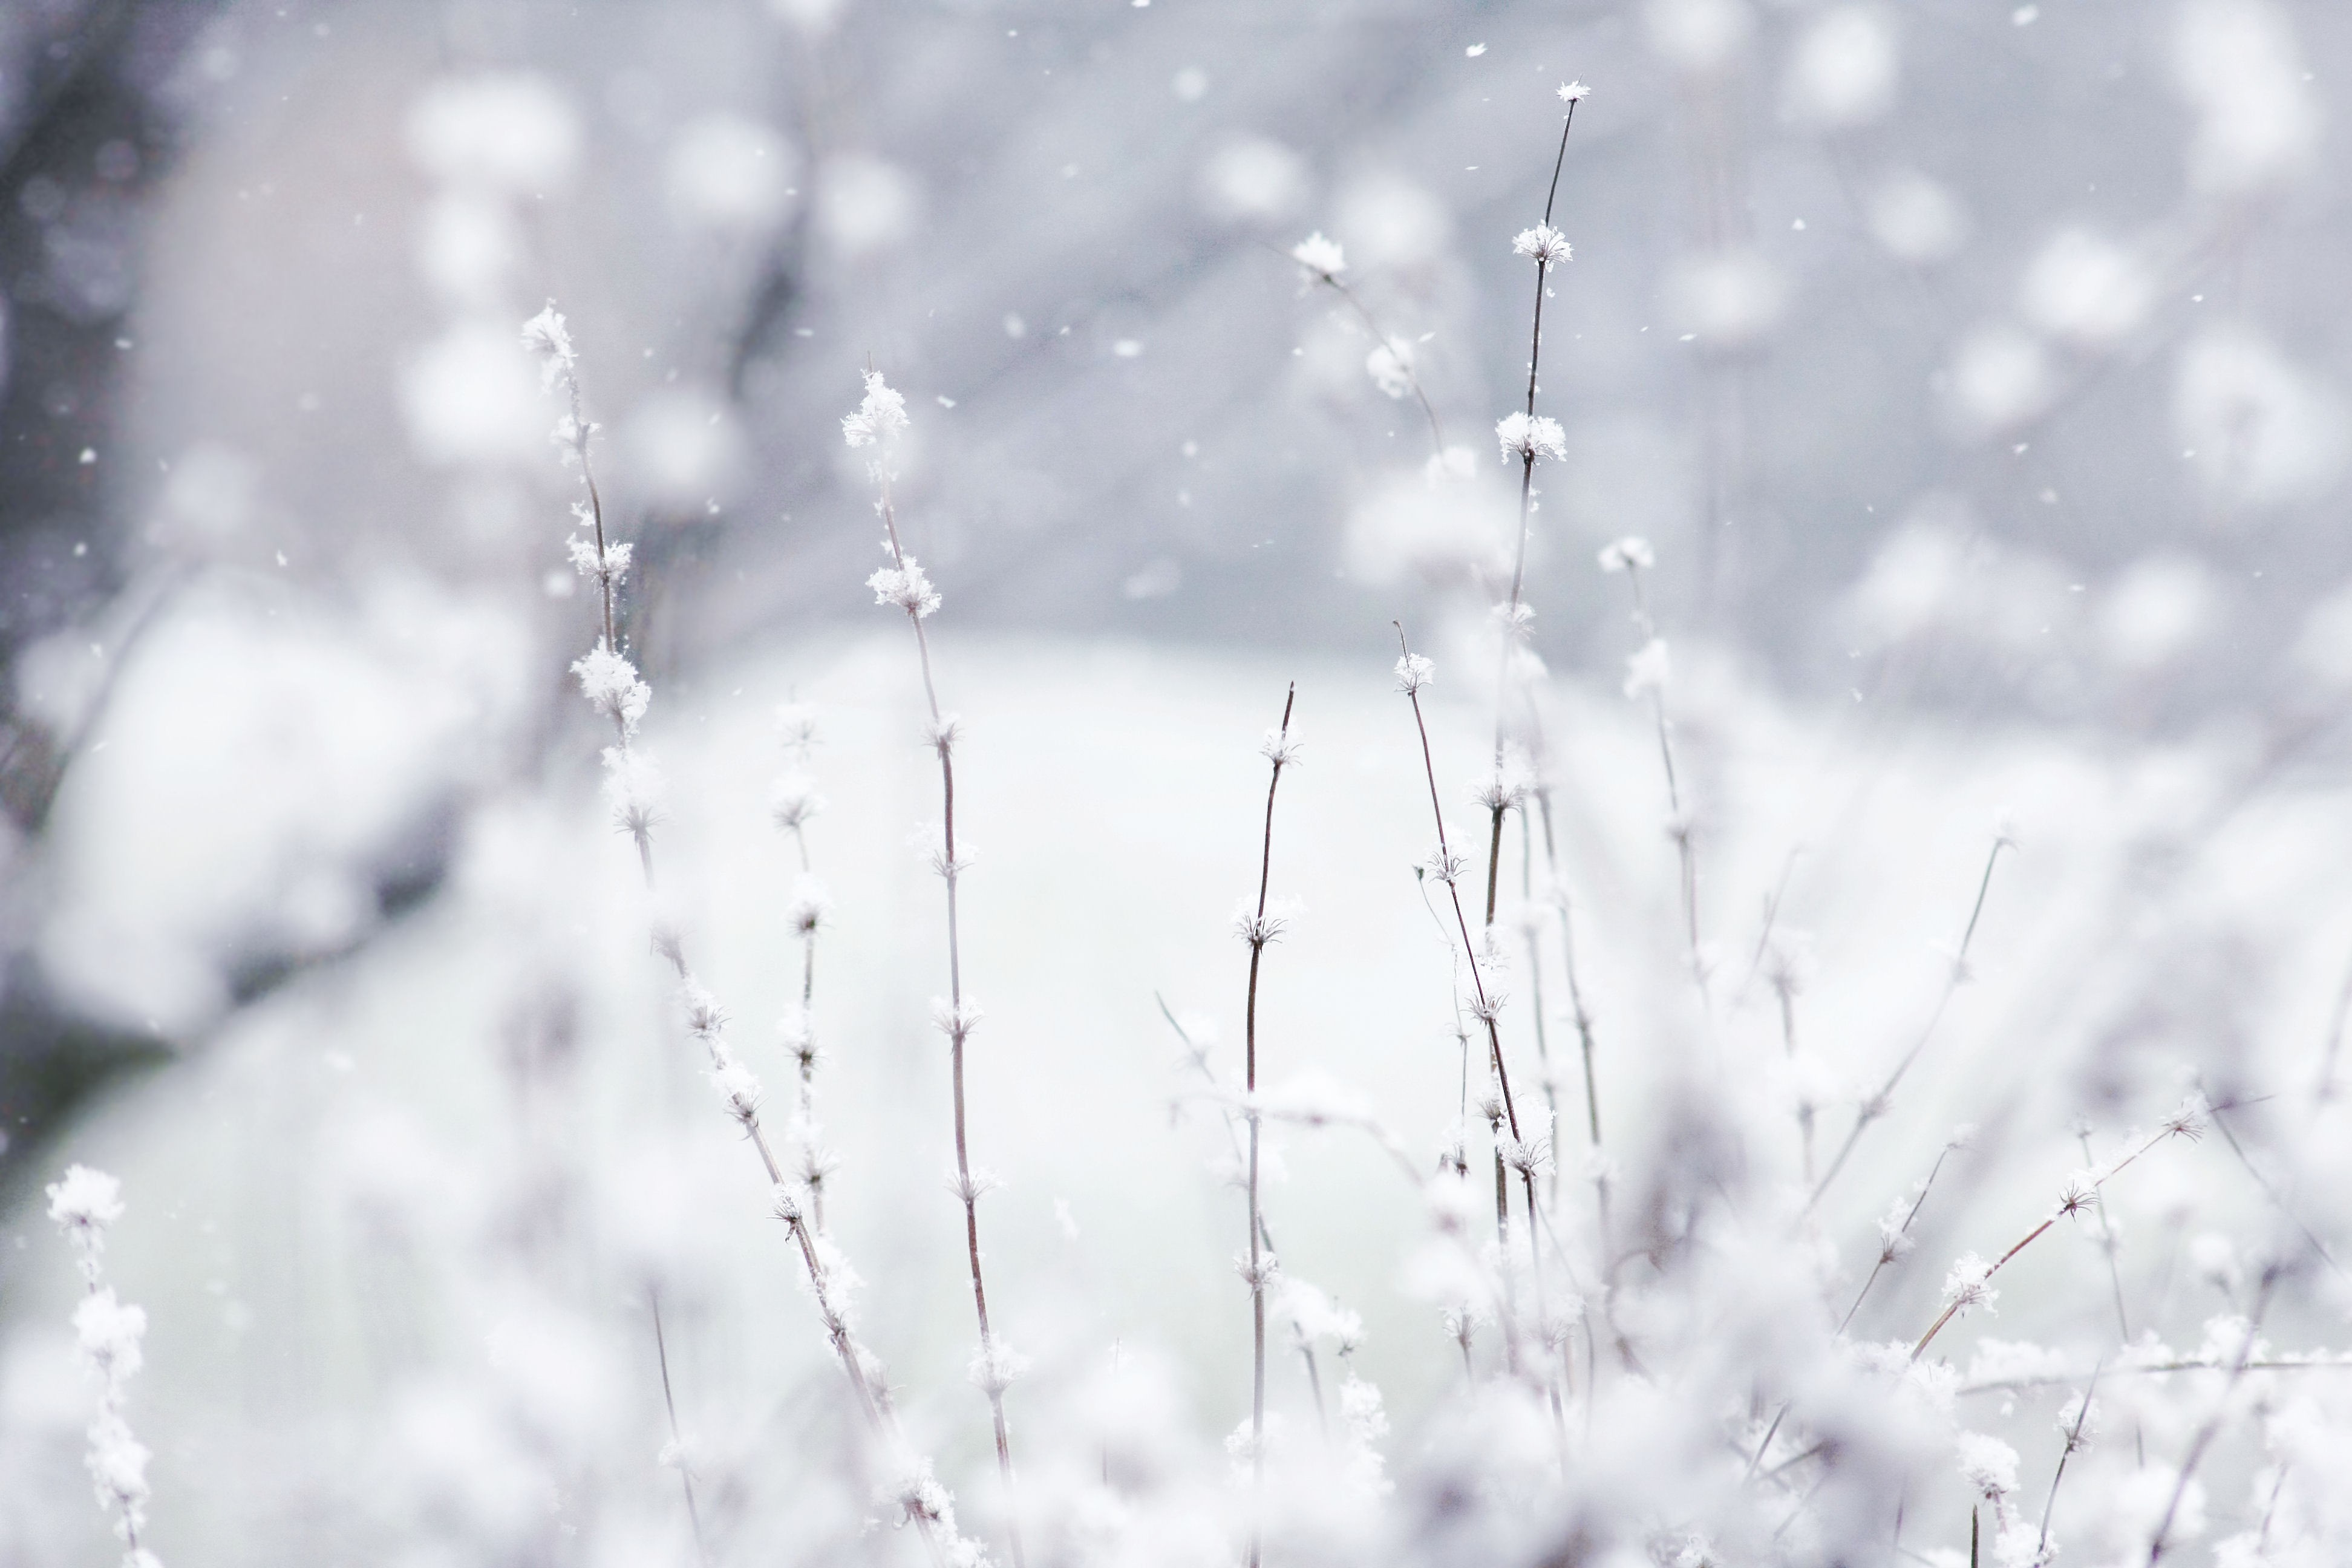 General 3888x2592 photography nature depth of field plants snow winter